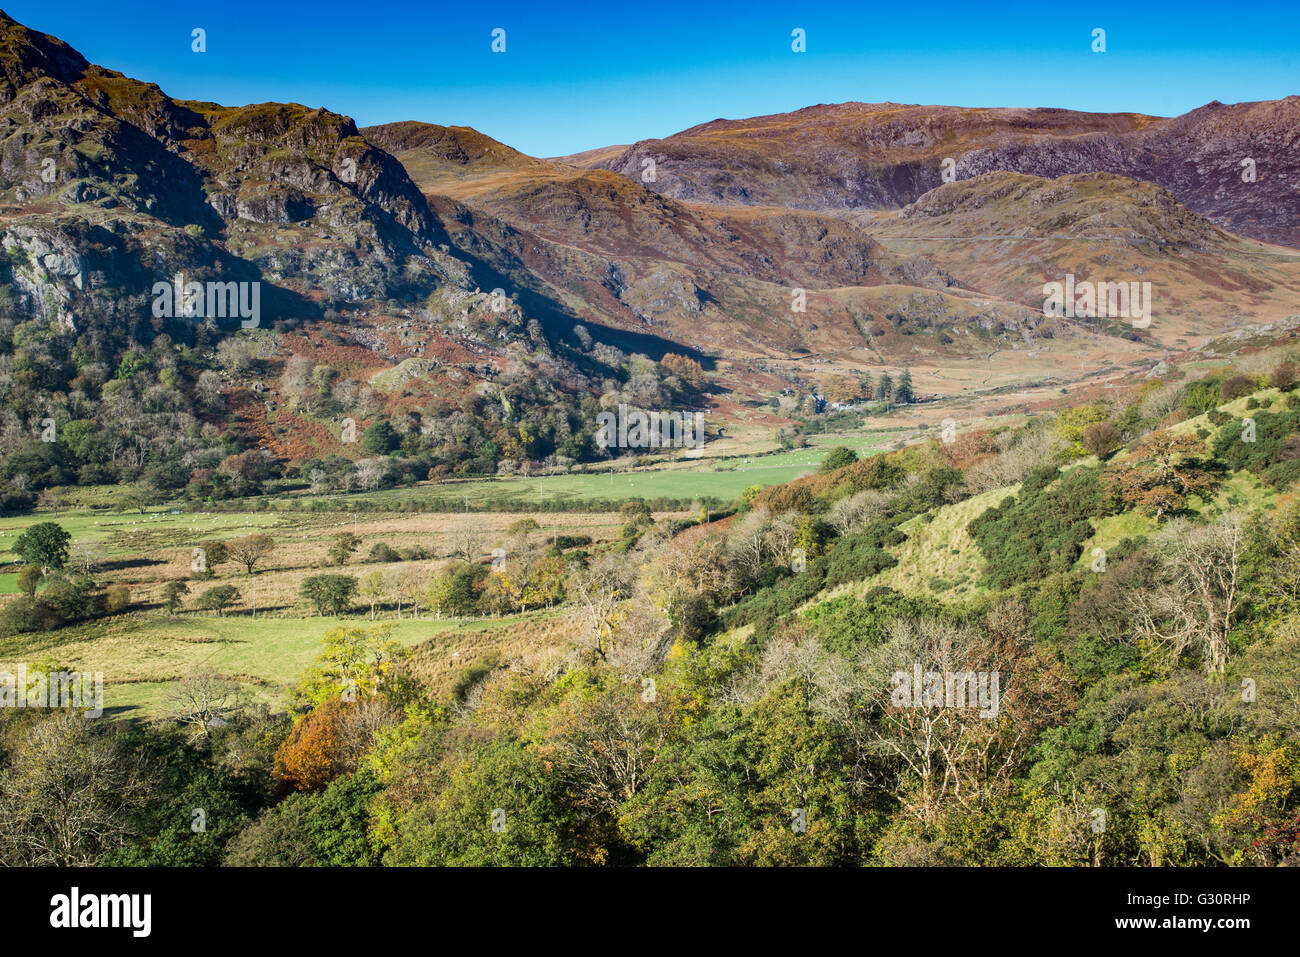 NORTH WALES, UK - OCTOBER 2015 - A VIEW OF THE BEDDGELERT VALLEY IN NORTH WALES Stock Photo